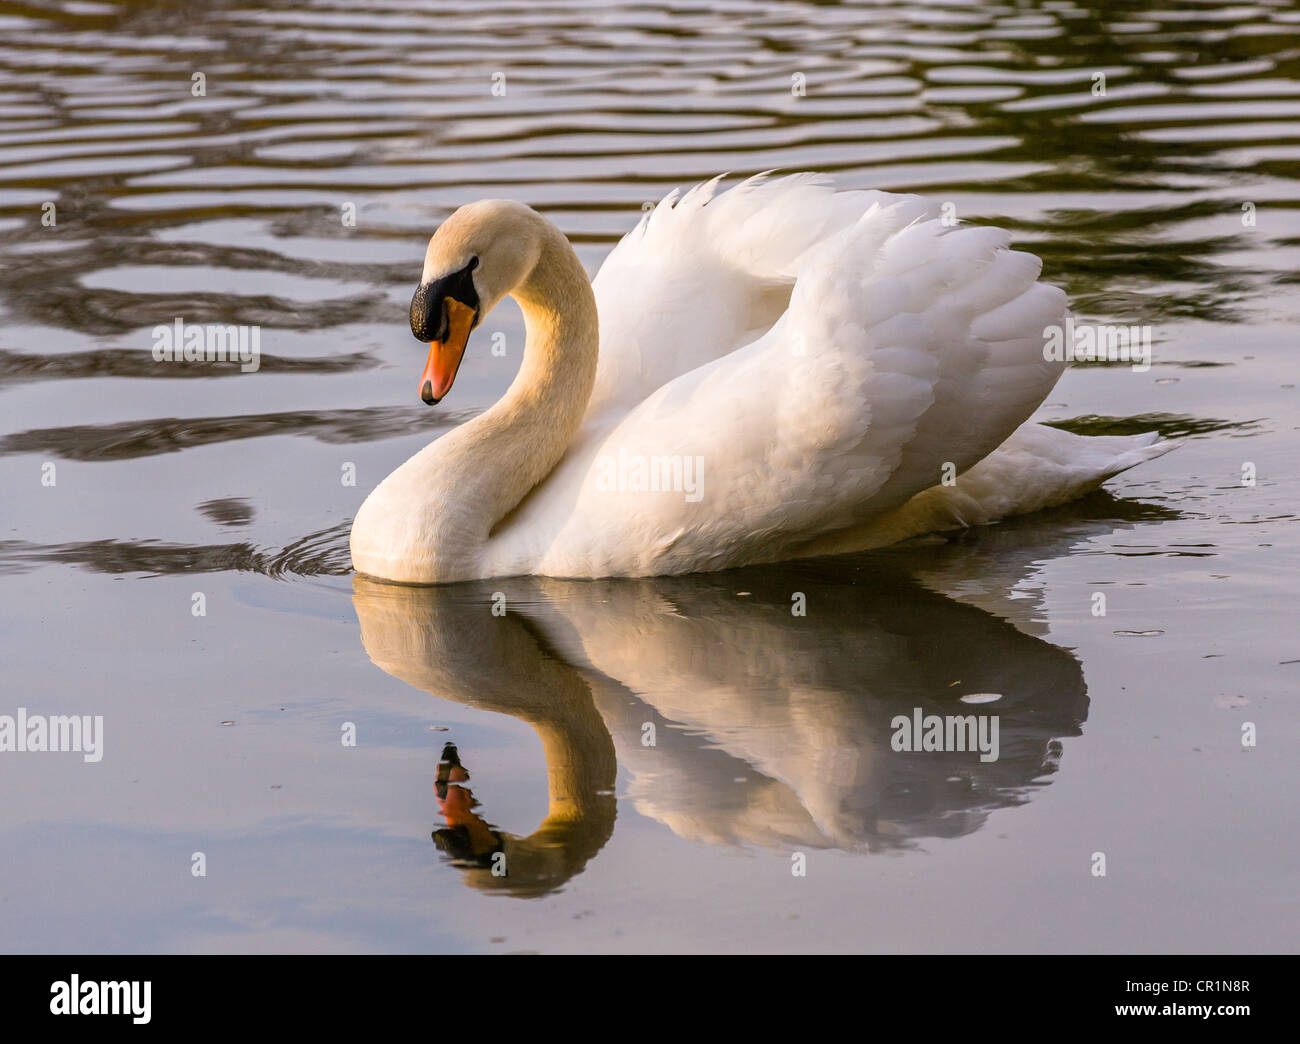 Swan, fiume Coquet, Northumberland, Inghilterra Foto Stock